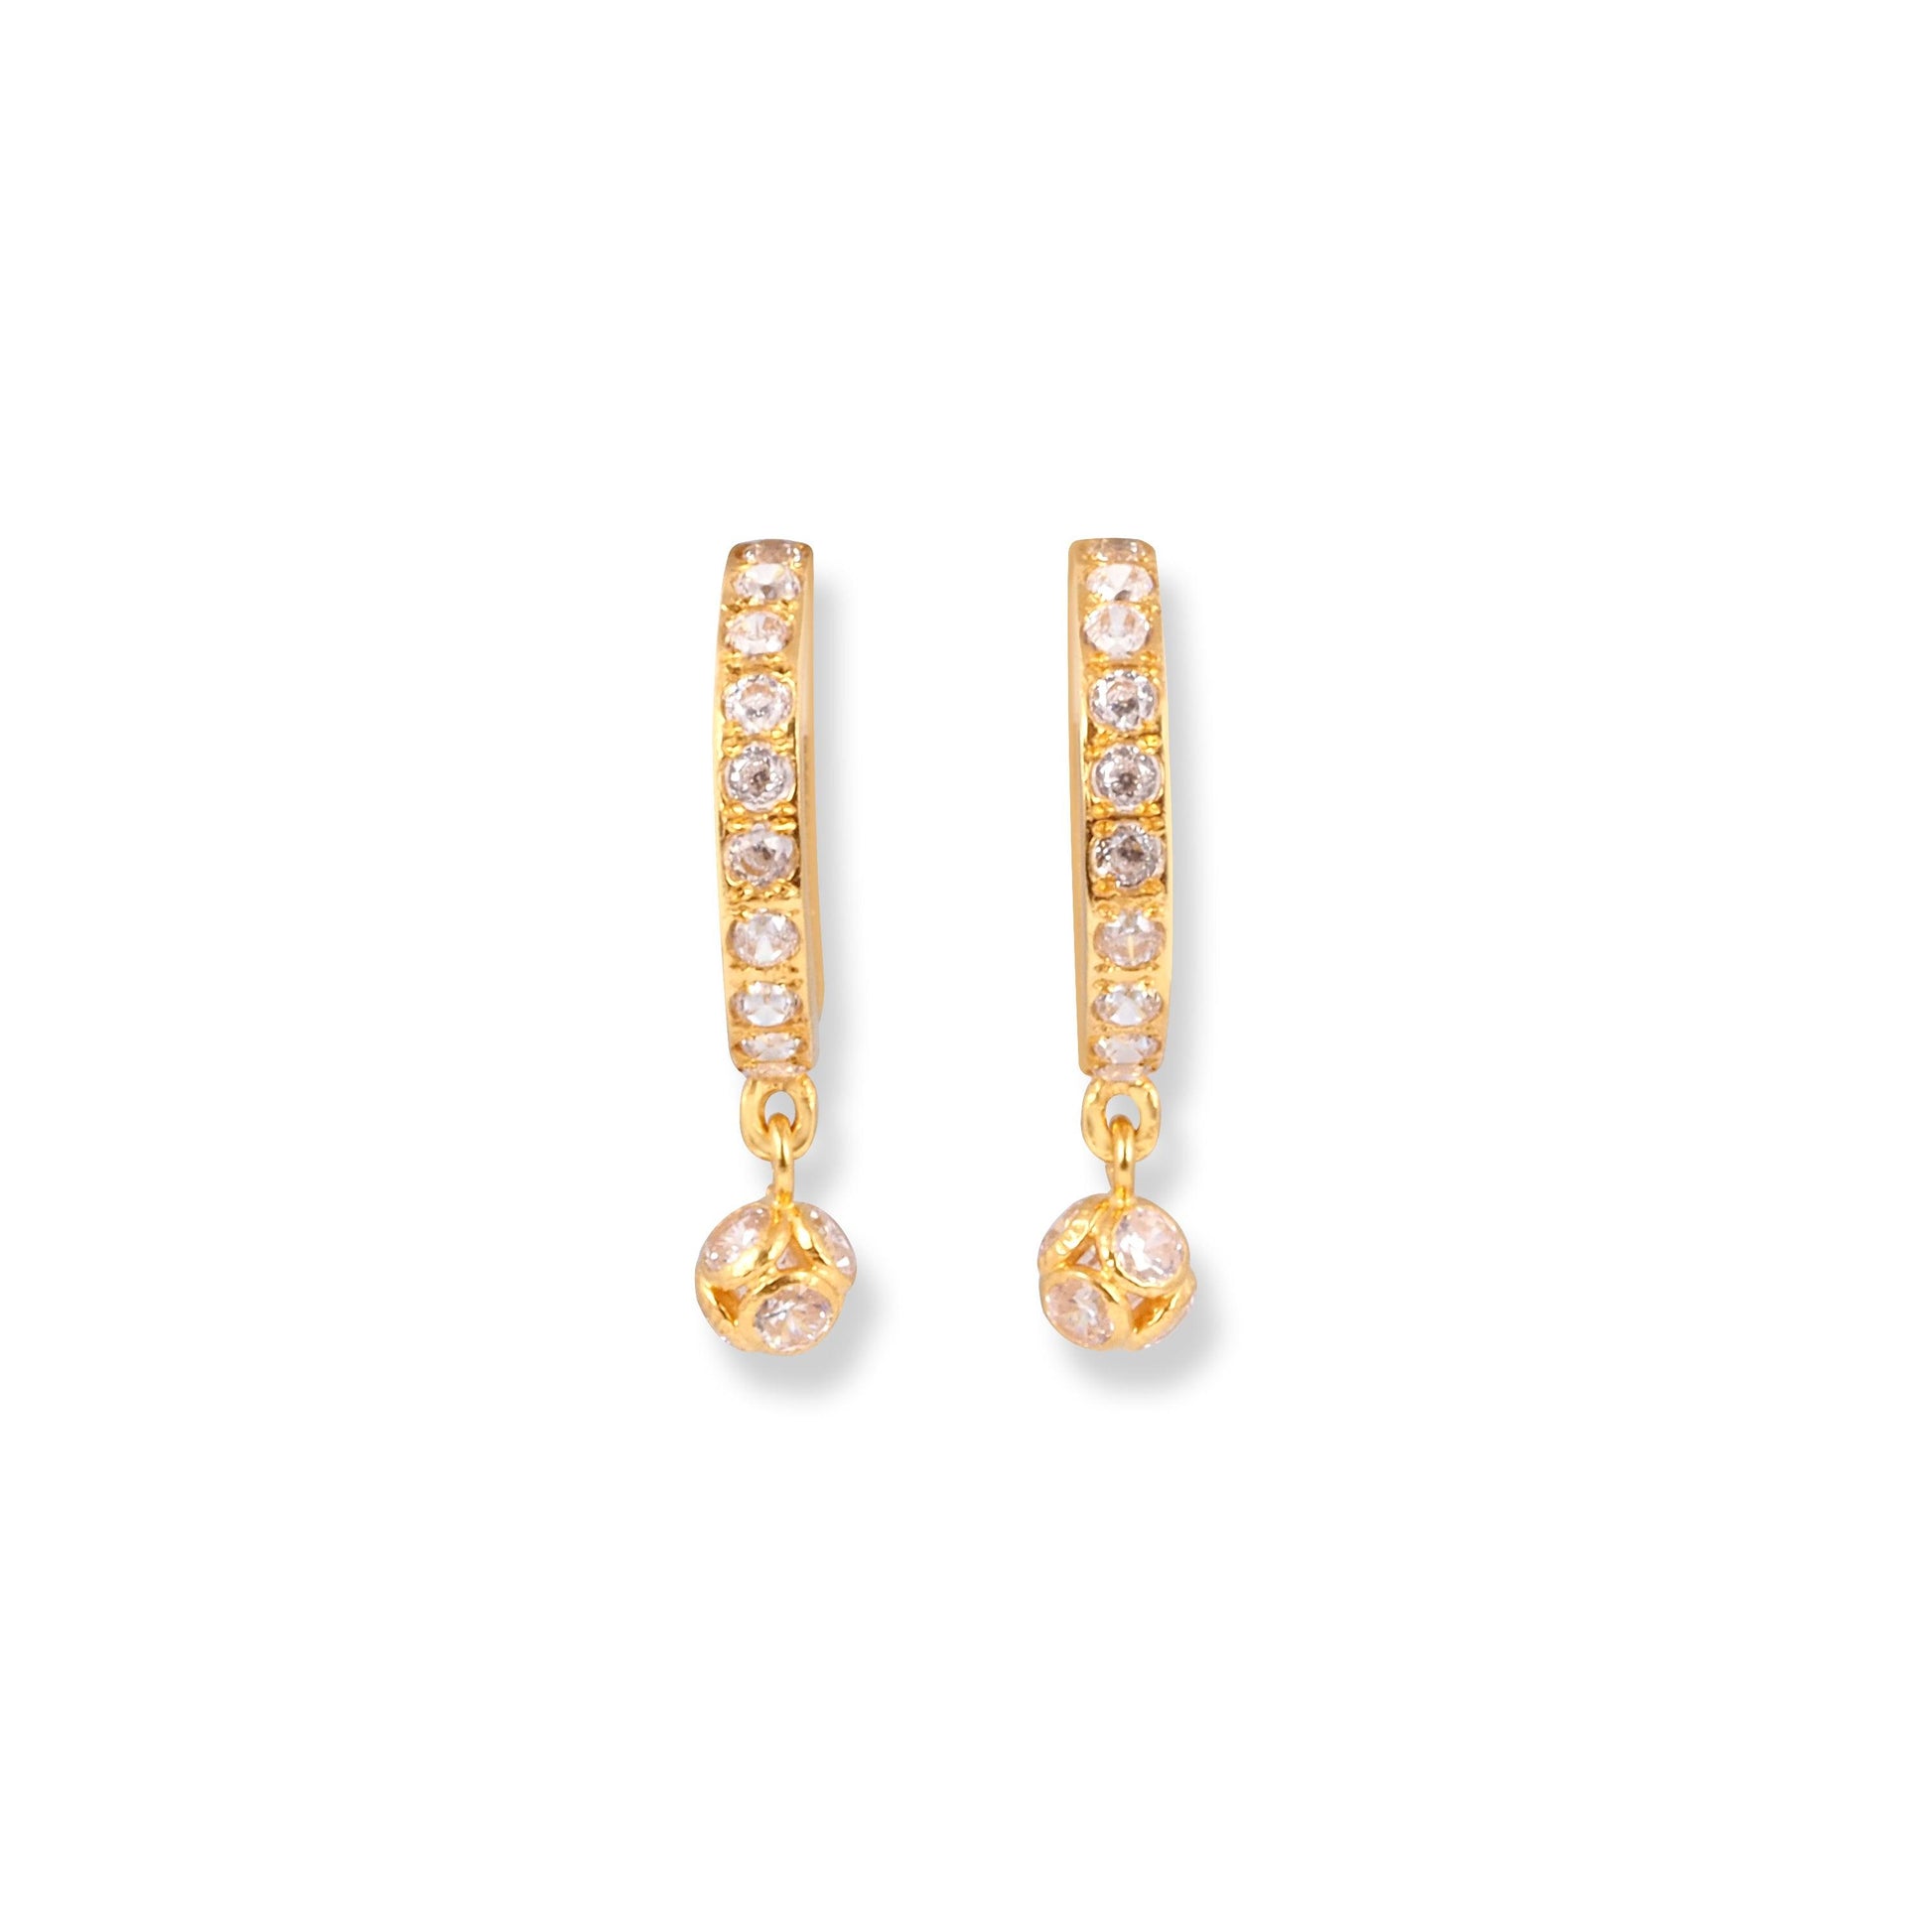 22ct Gold Cubic Zirconia Hoop Earrings with Drops E-7653 - Minar Jewellers